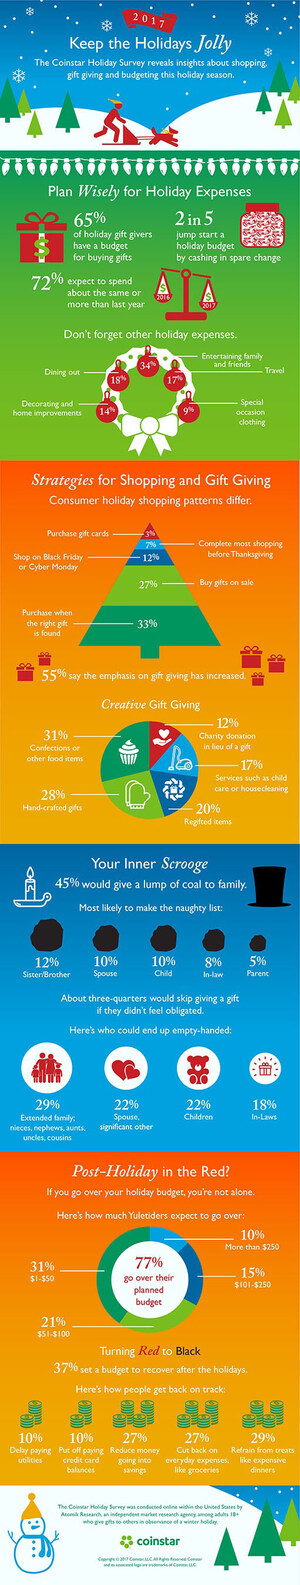 Coinstar Holiday Survey: Results Reveal the Majority of Holiday Gift Givers Set a Budget, Yet Hidden Expenses Put Many in the Red